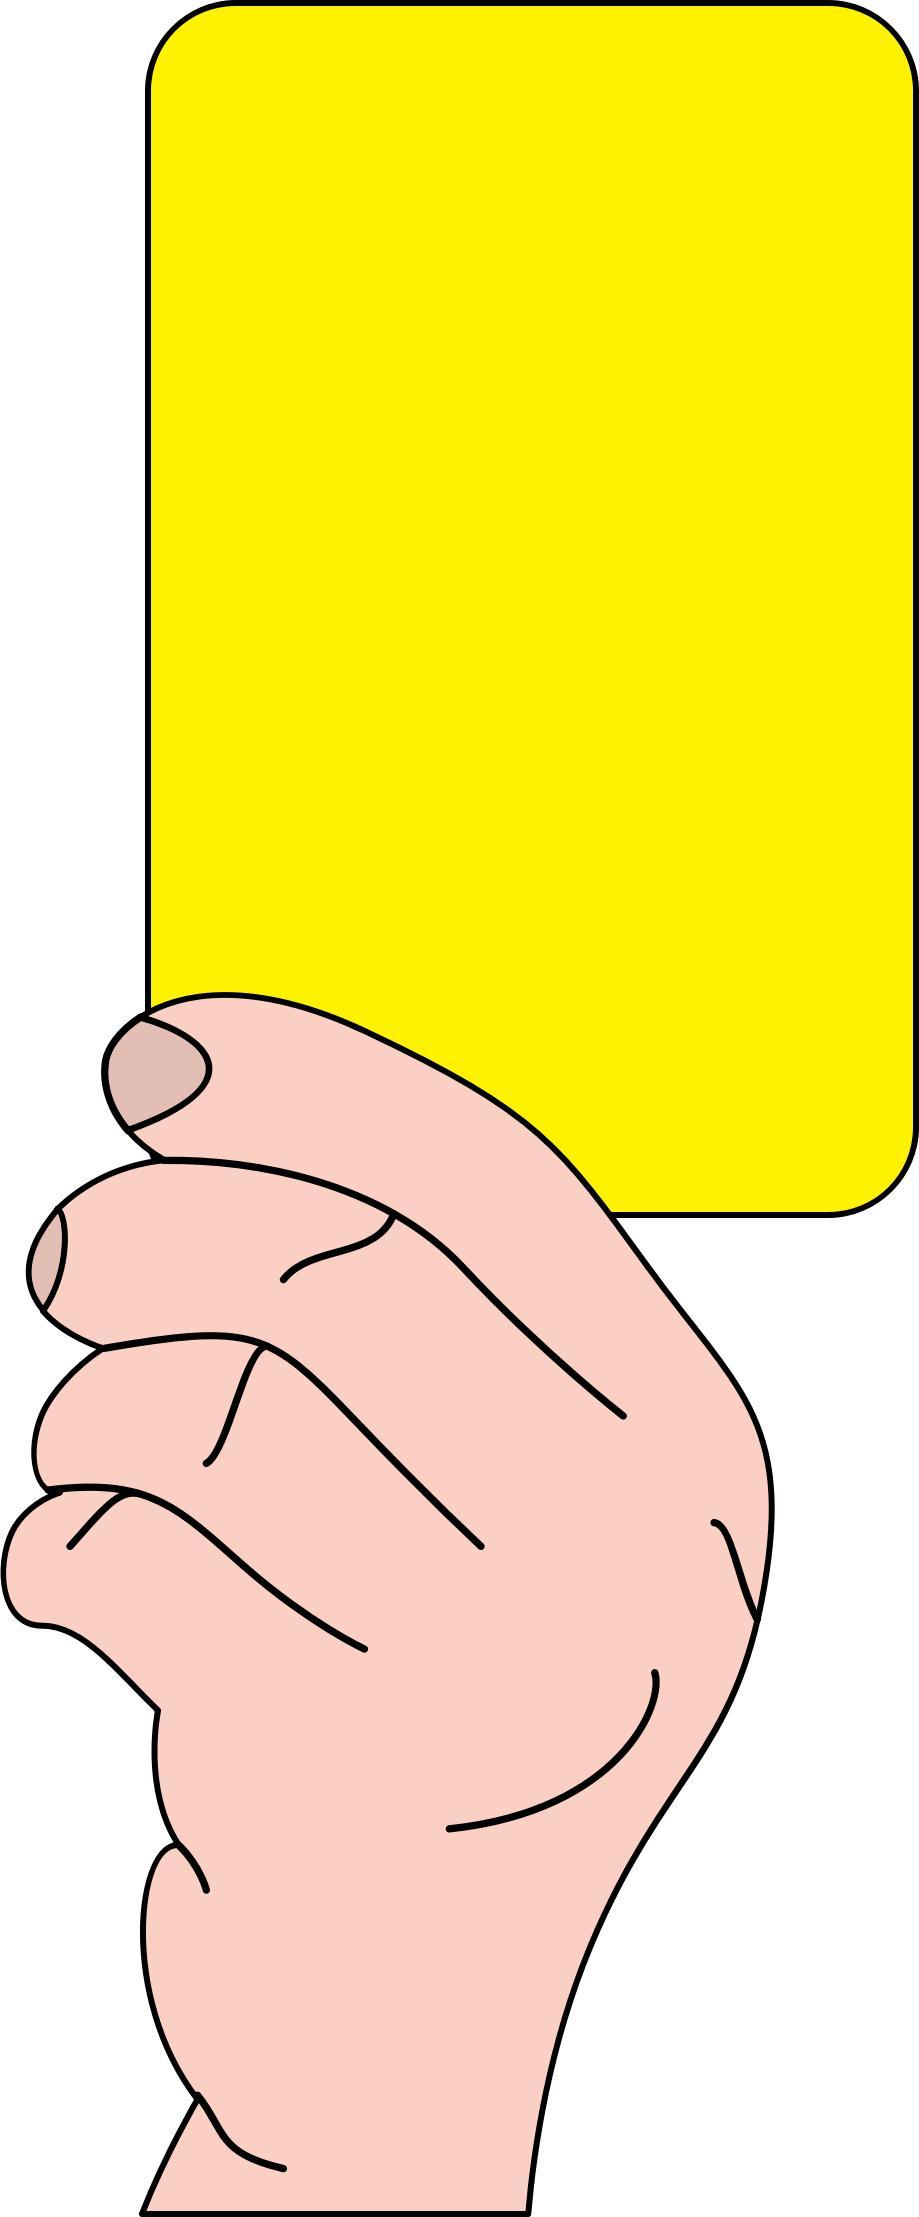 Referee showing yellow card png transparent